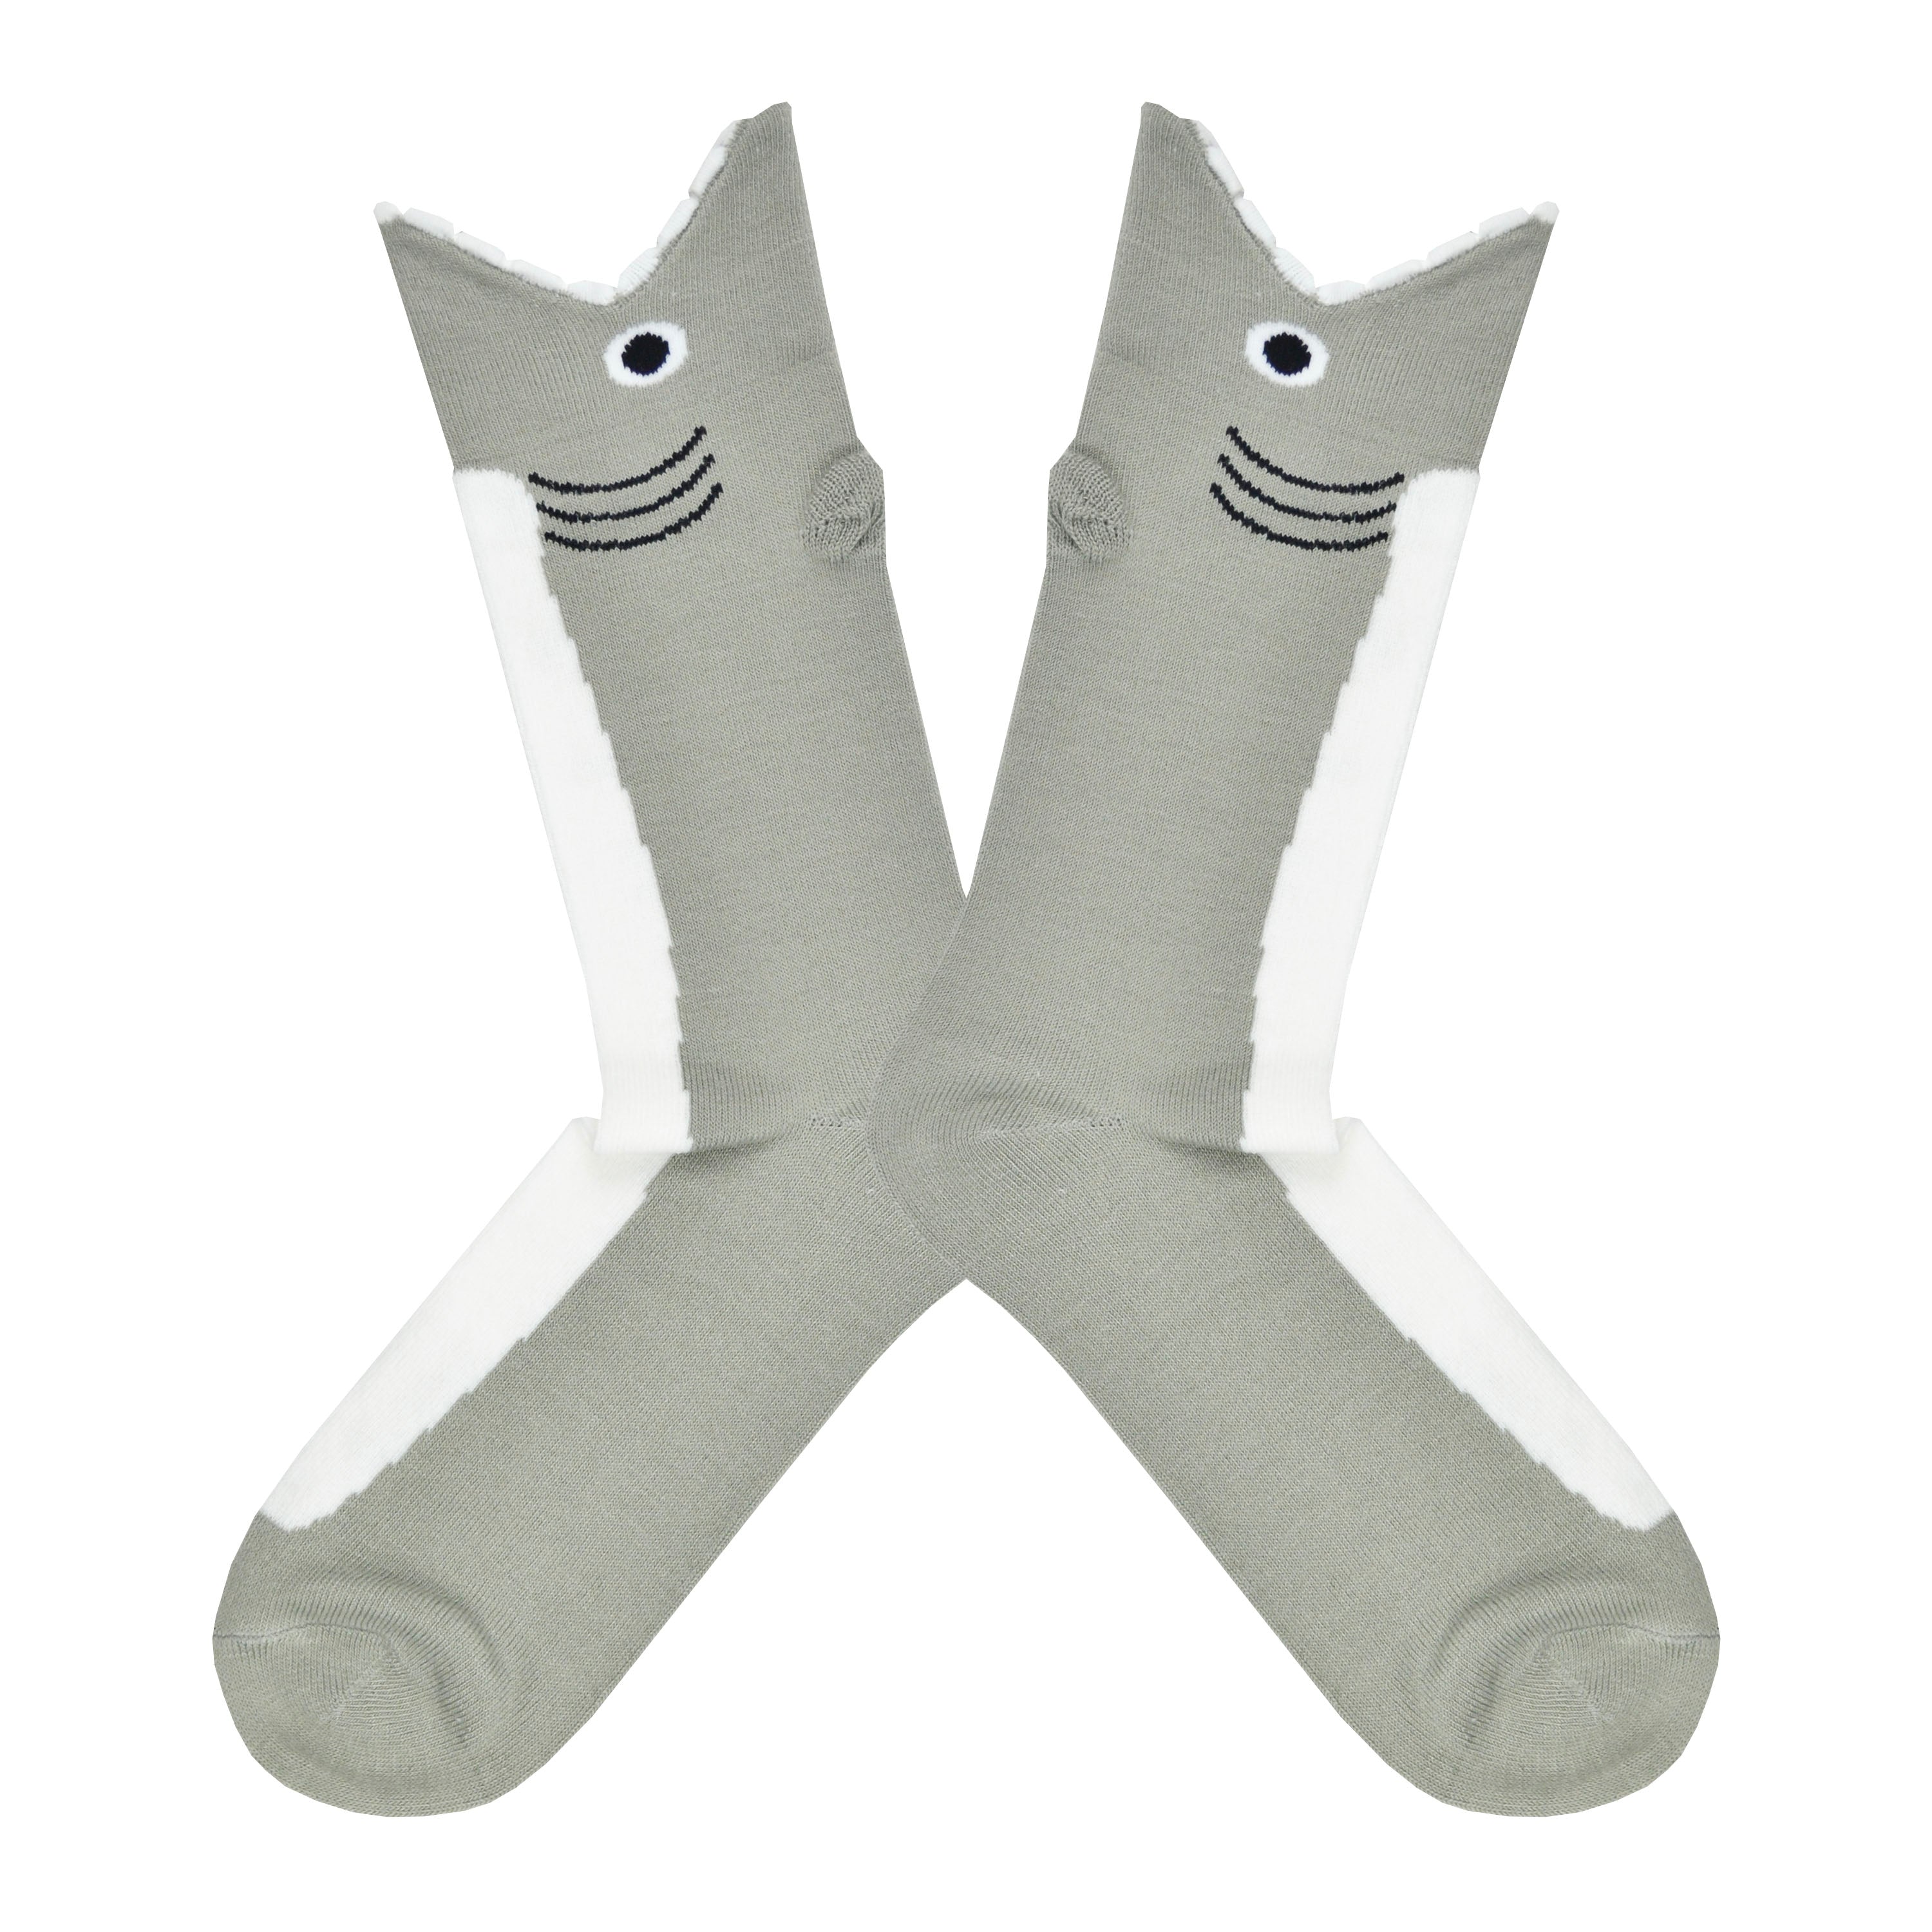 Shown in a flatlay, a pair of K.Bell brand men's acrylic crew socks in grey and white. These socks feature a white front and are shaped like a shark. The cuff is the sharks mouth with a frilled edge to mimic the sharks teeth around your leg.